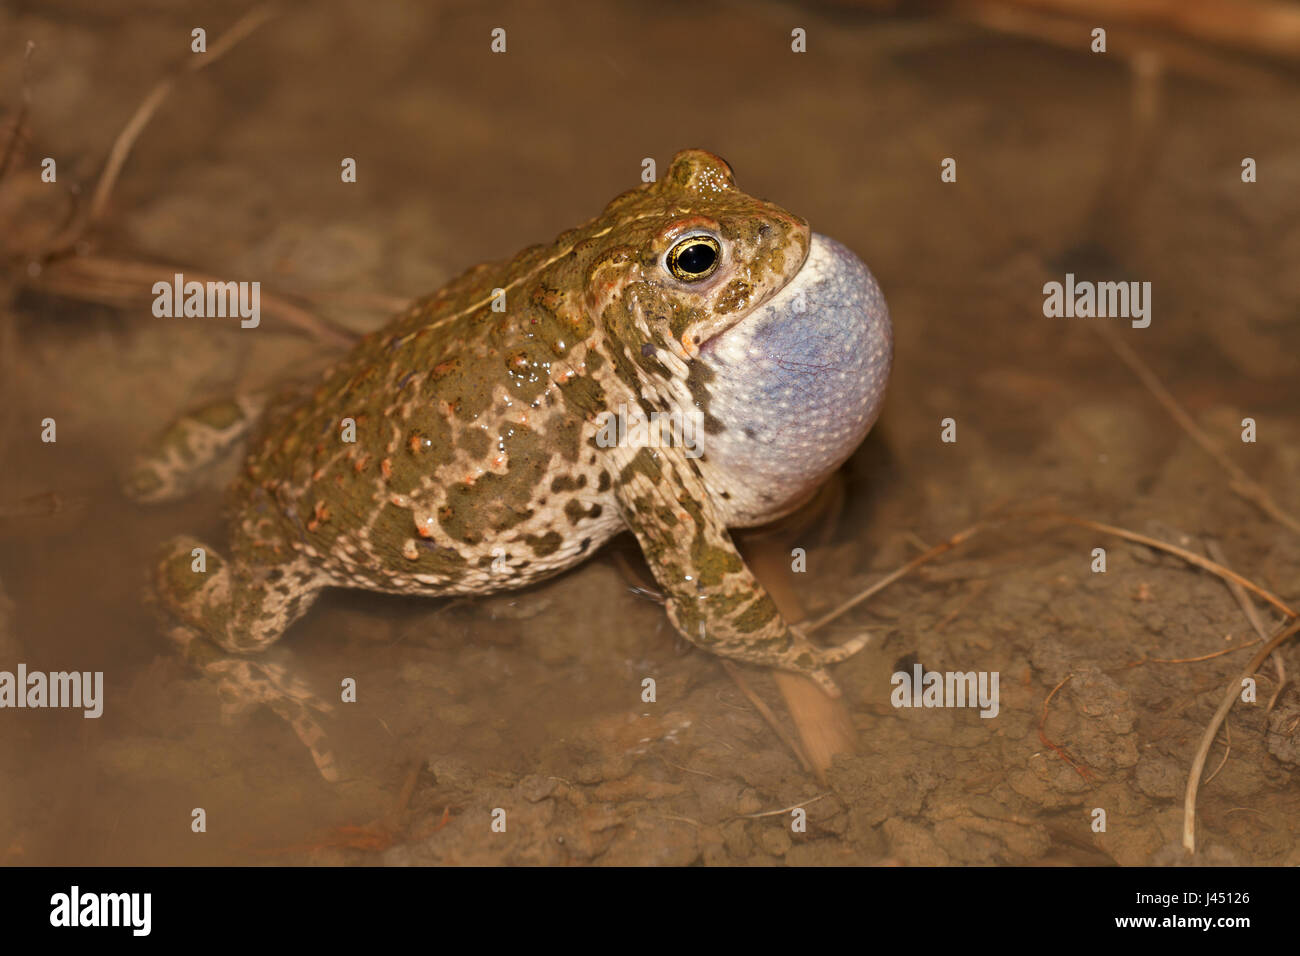 male natterjack toad calling on flooded corn field Stock Photo